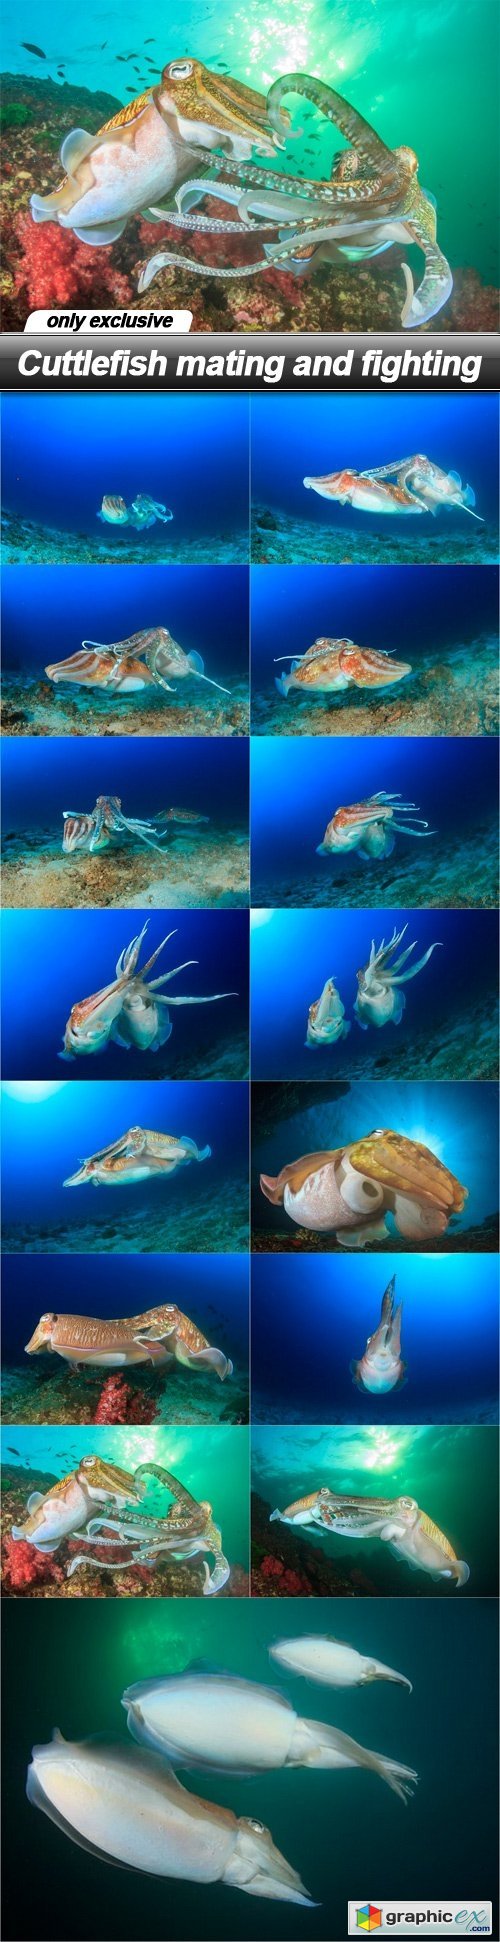 Cuttlefish mating and fighting - 15 UHQ JPEG